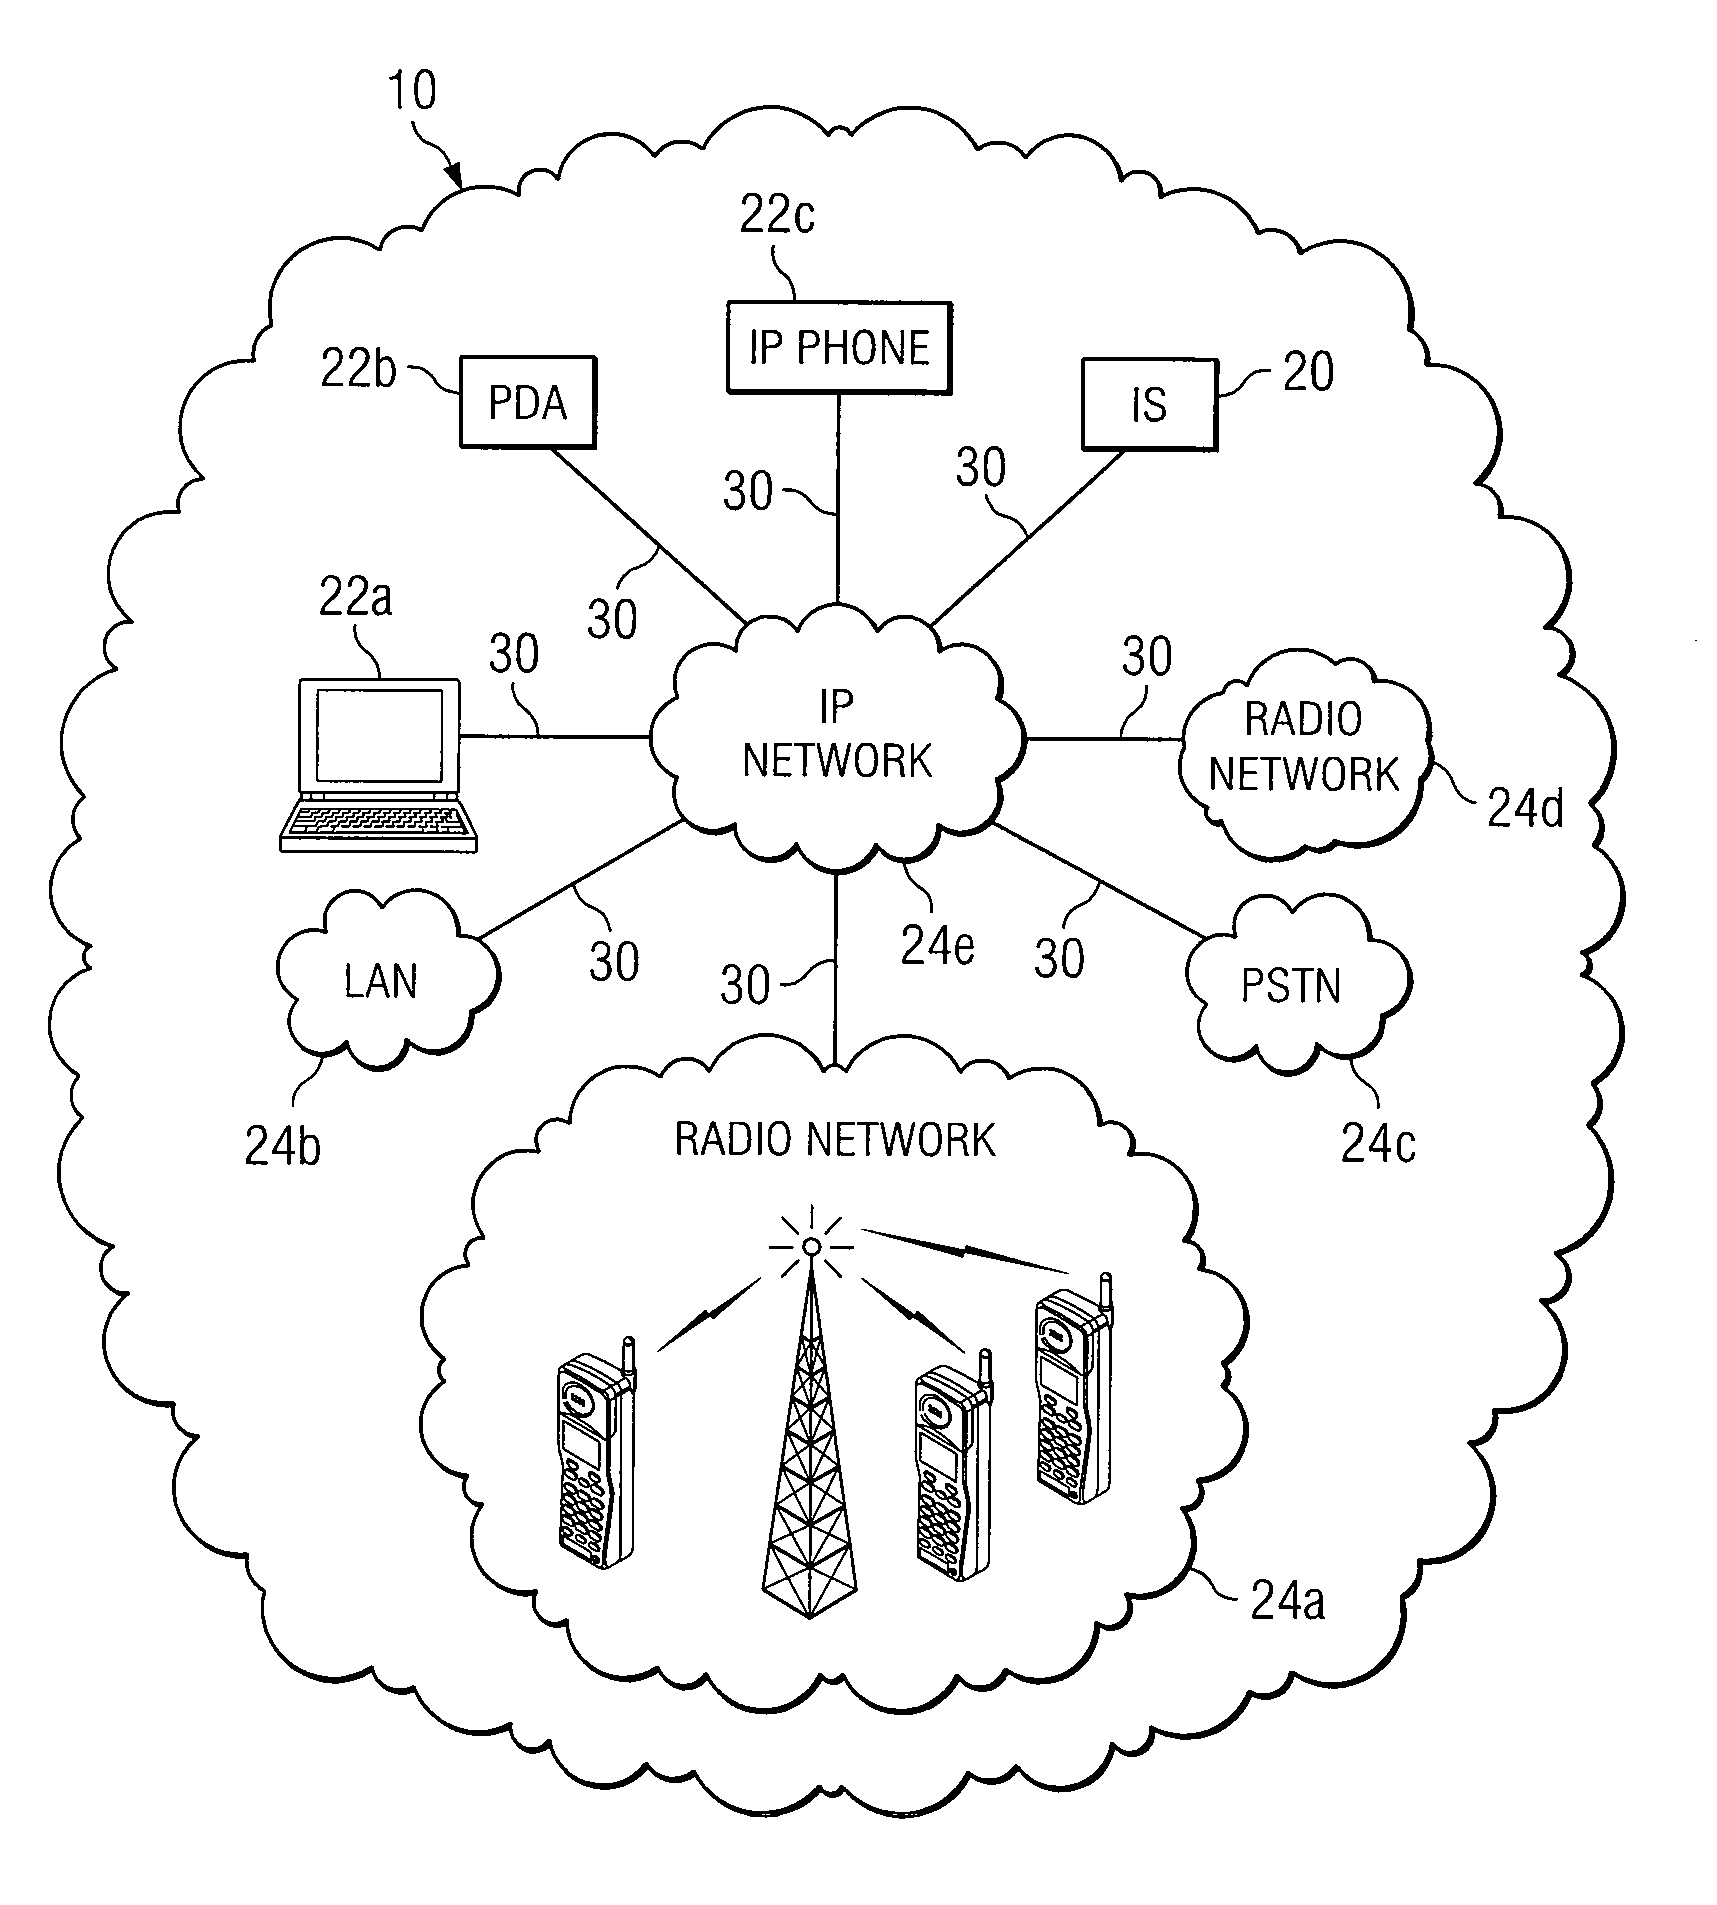 Method and System for Joining a Virtual Talk Group